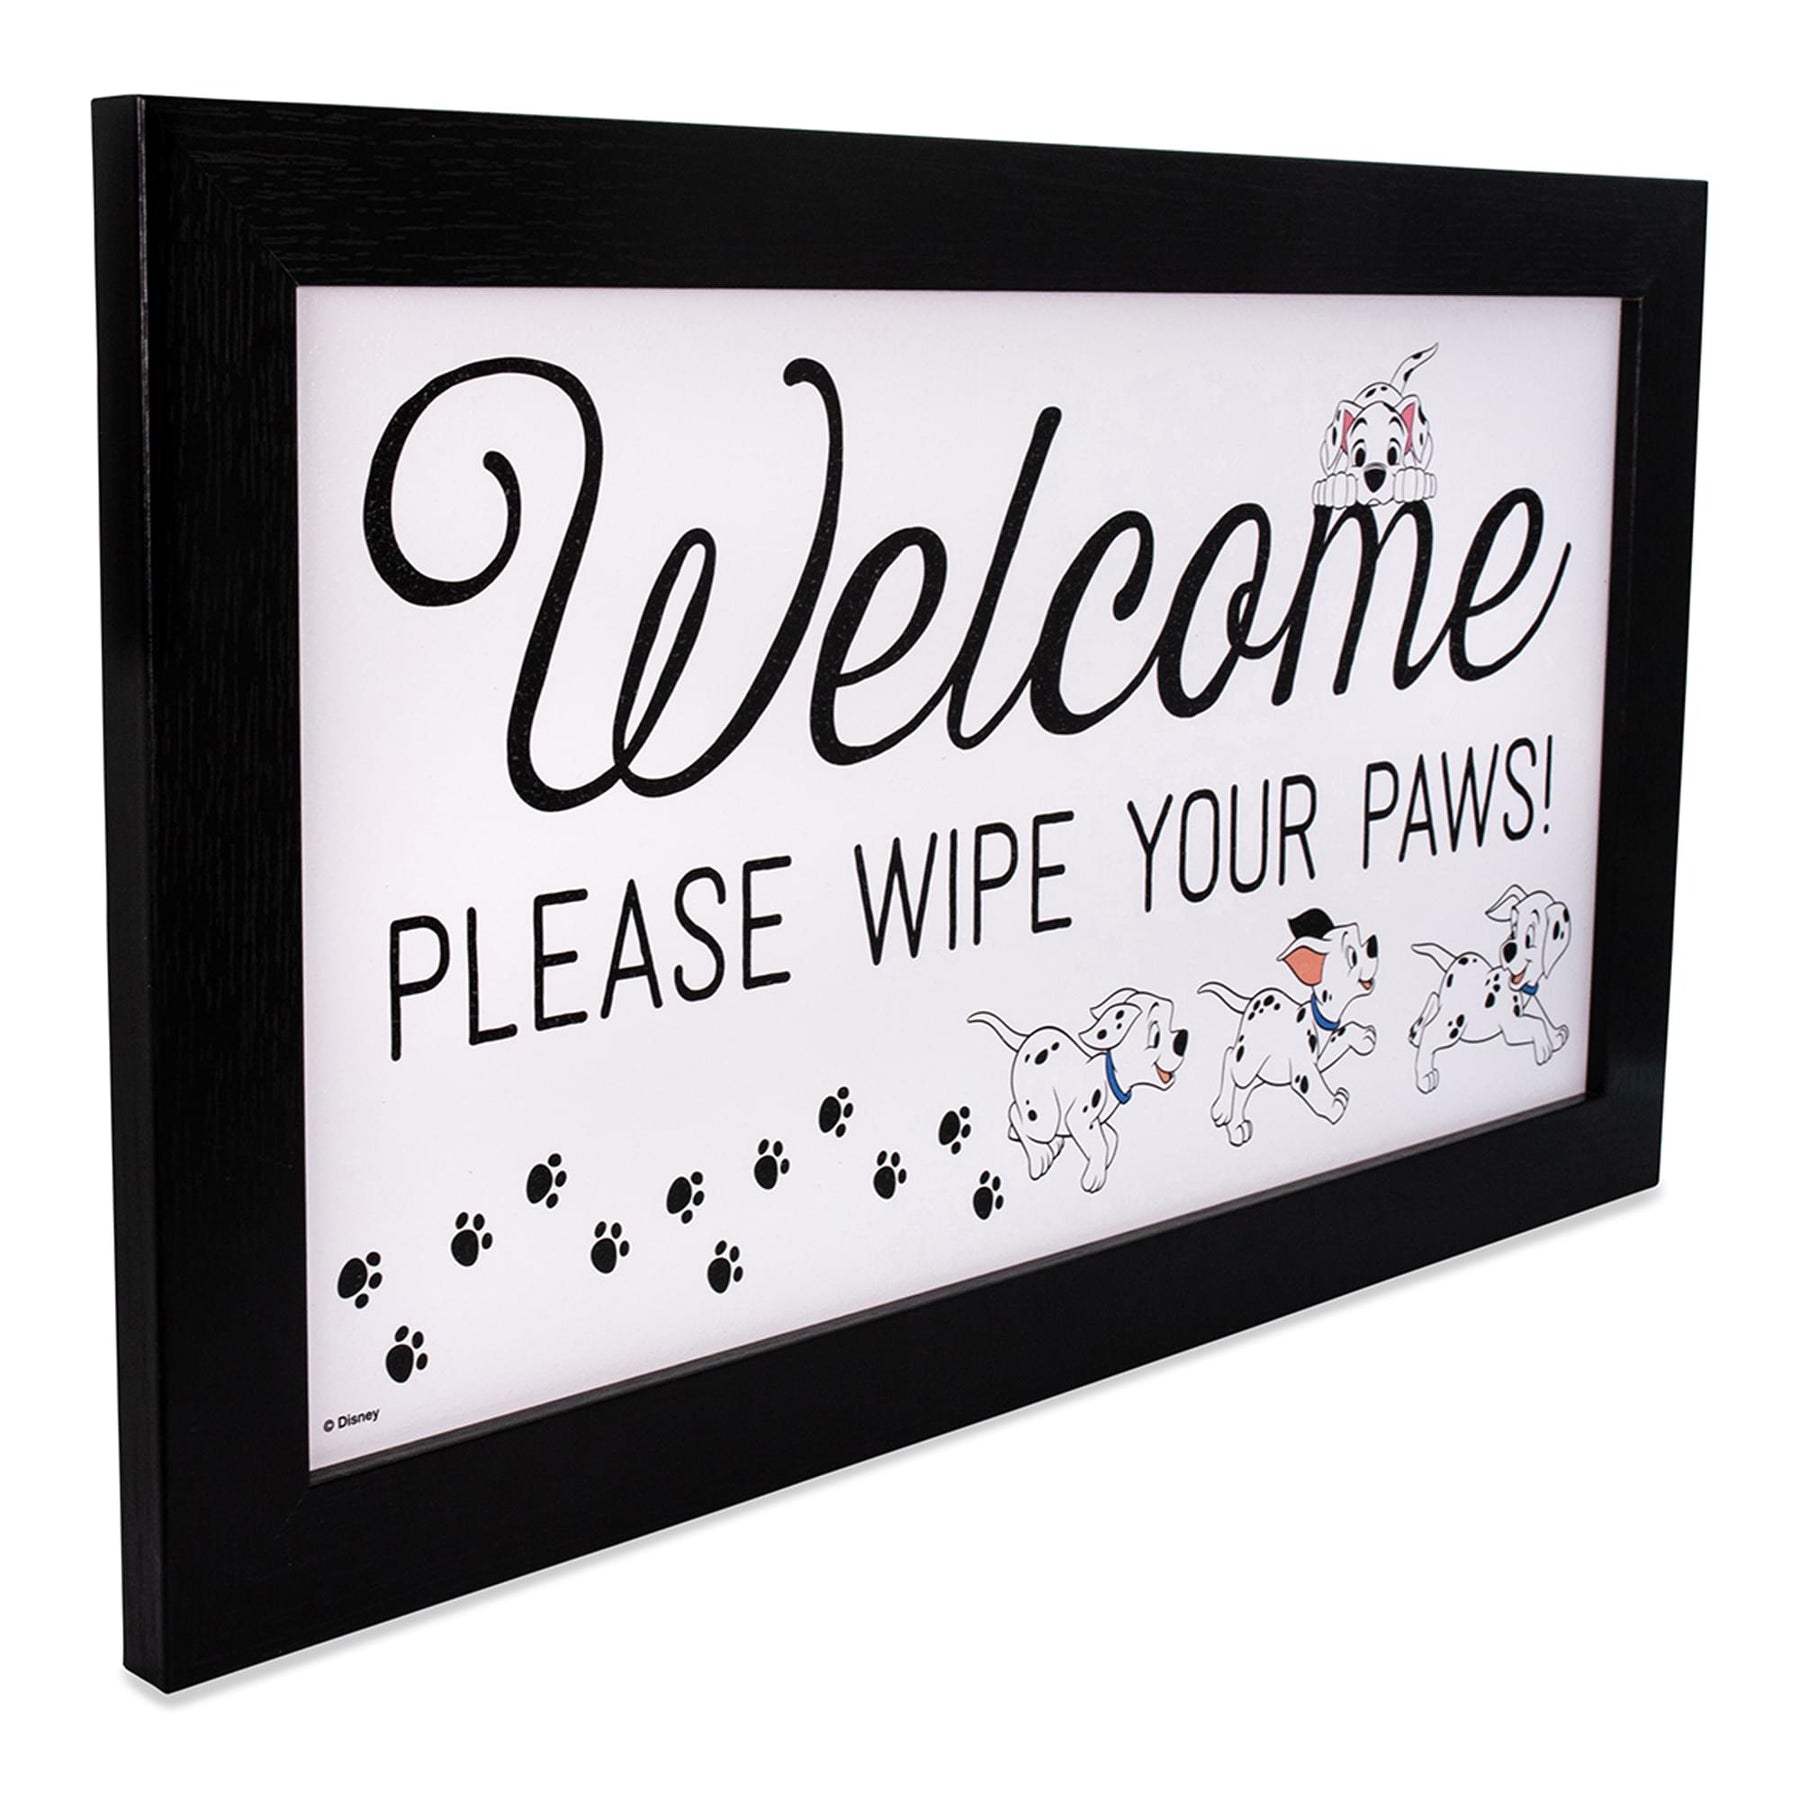 Disney 101 Dalmatians "Wipe Your Paws" Hanging Sign Gel Coat Framed Wall Art